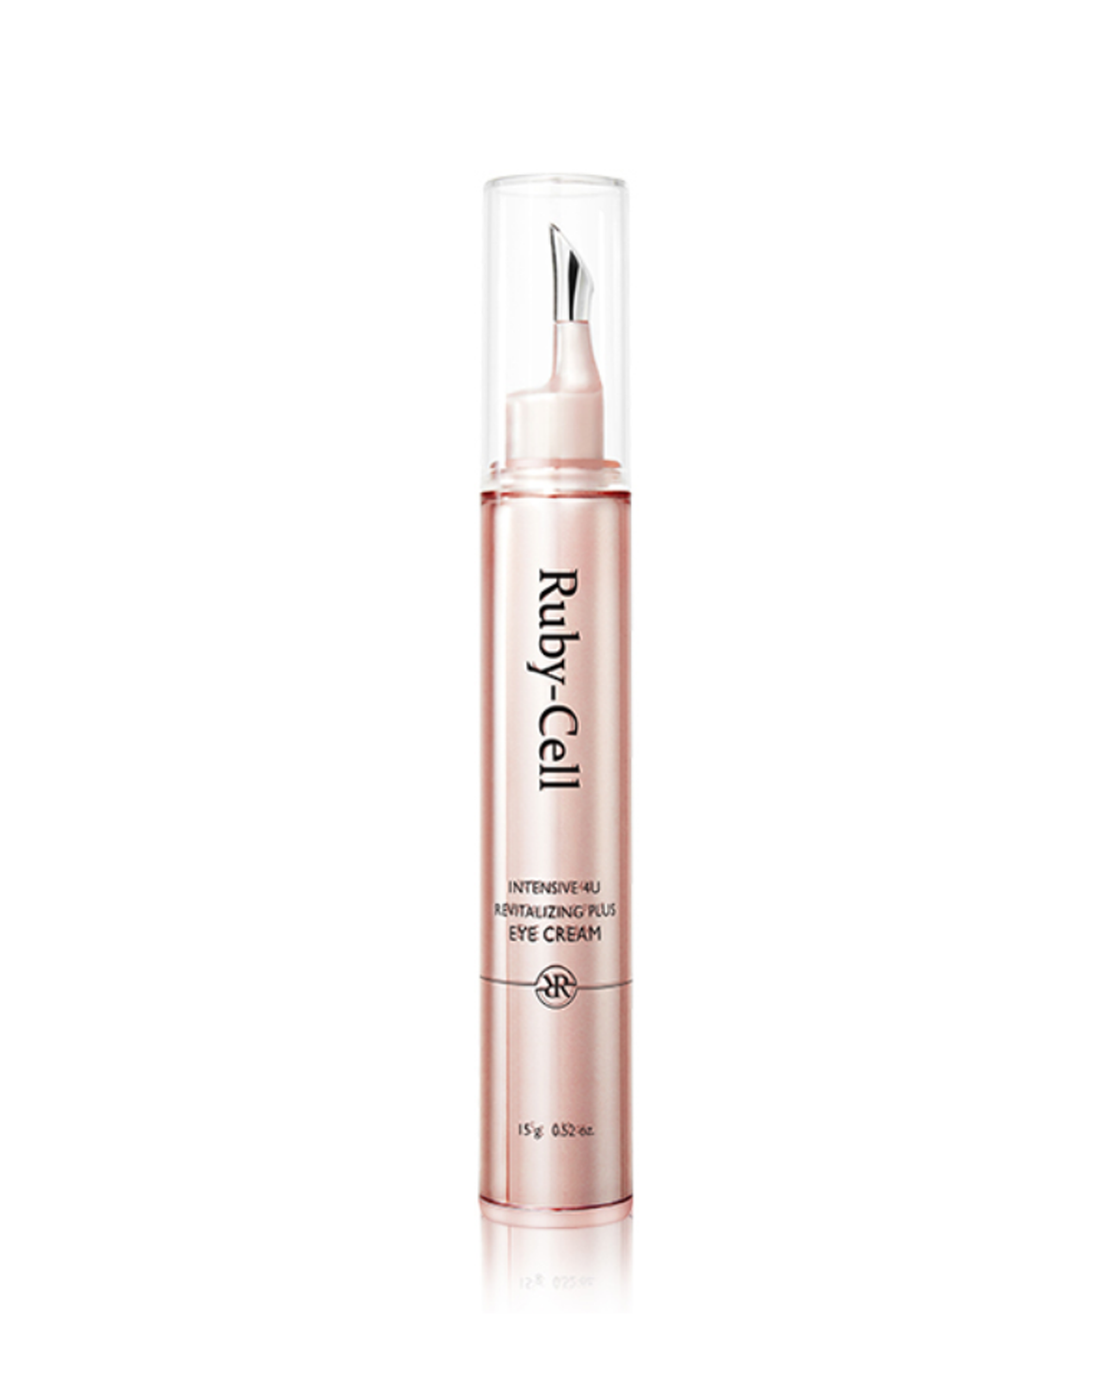 Ruby-Cell Intensive 4U Revitalizing Plus Augencreme